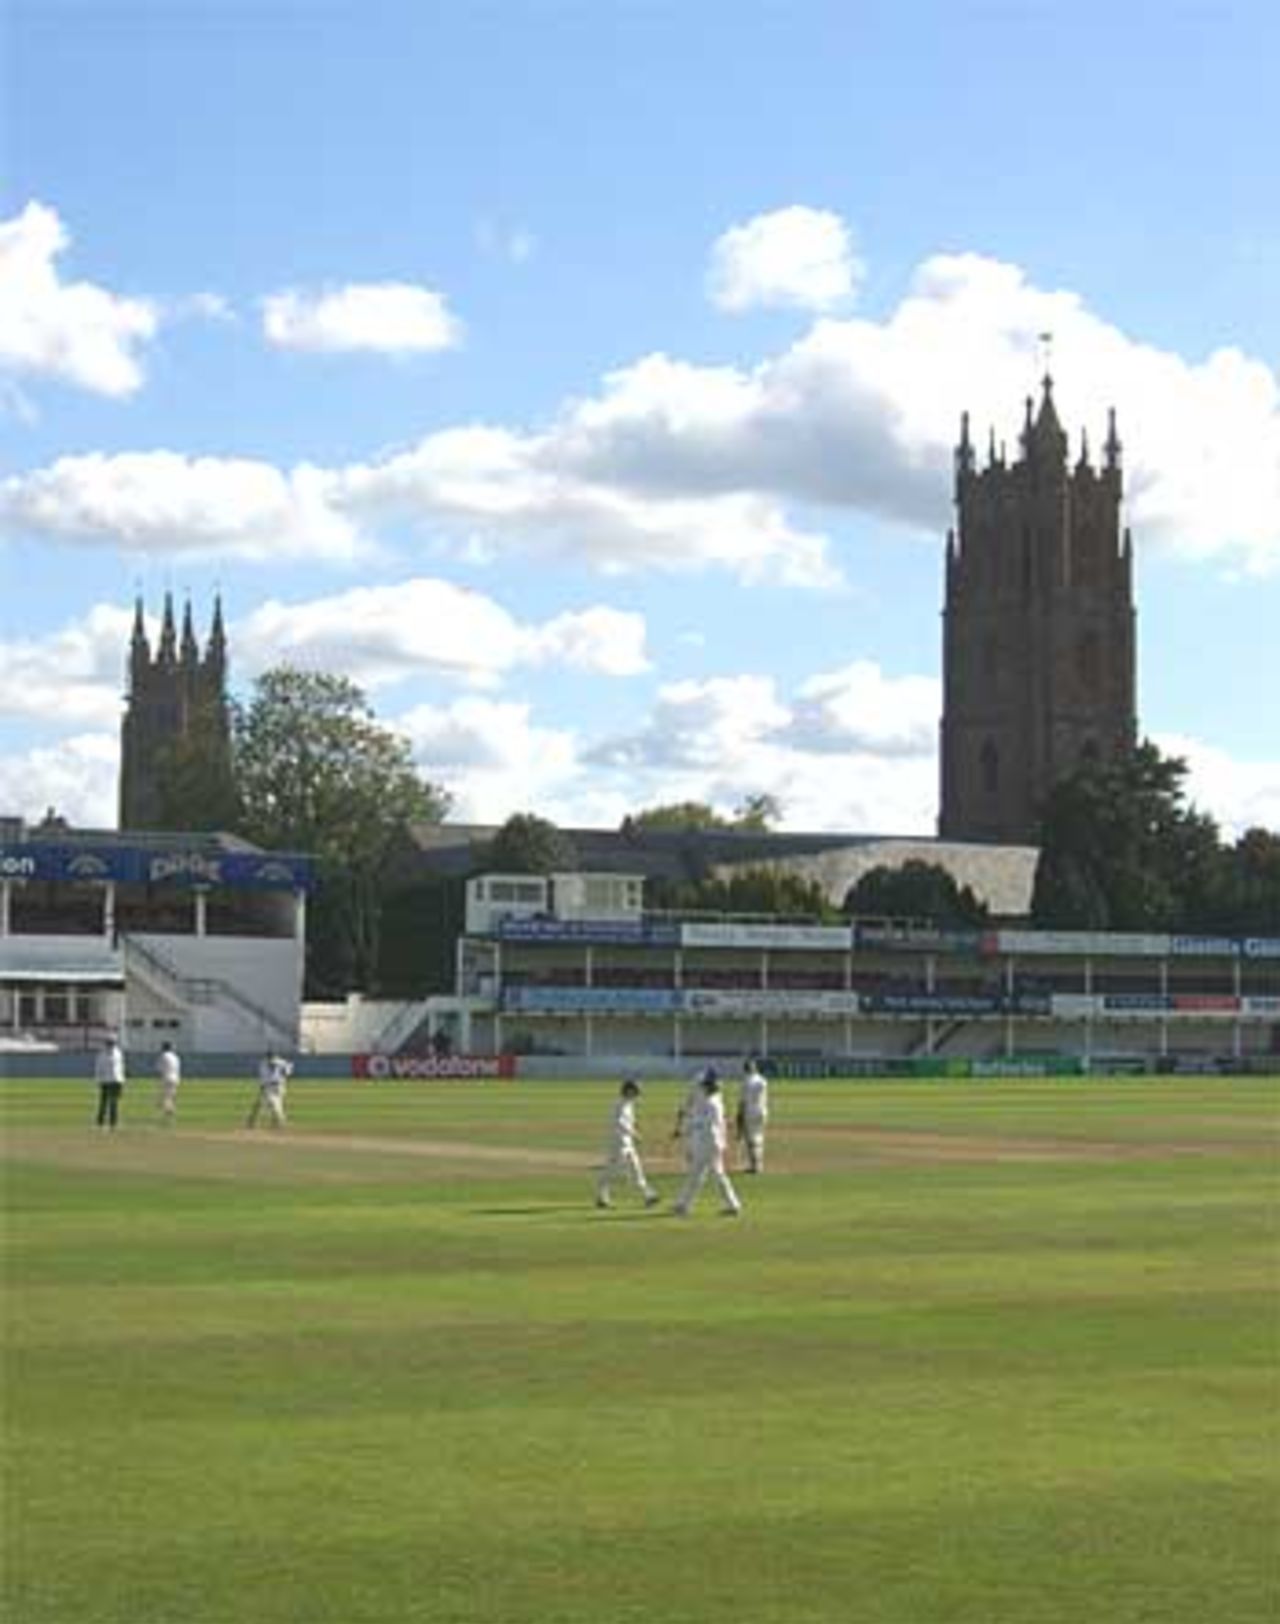 England and India settle in at Taunton as the ground is launched as the home of women's cricket, England women v India women, second Test, Taunton, 29 August, 2006